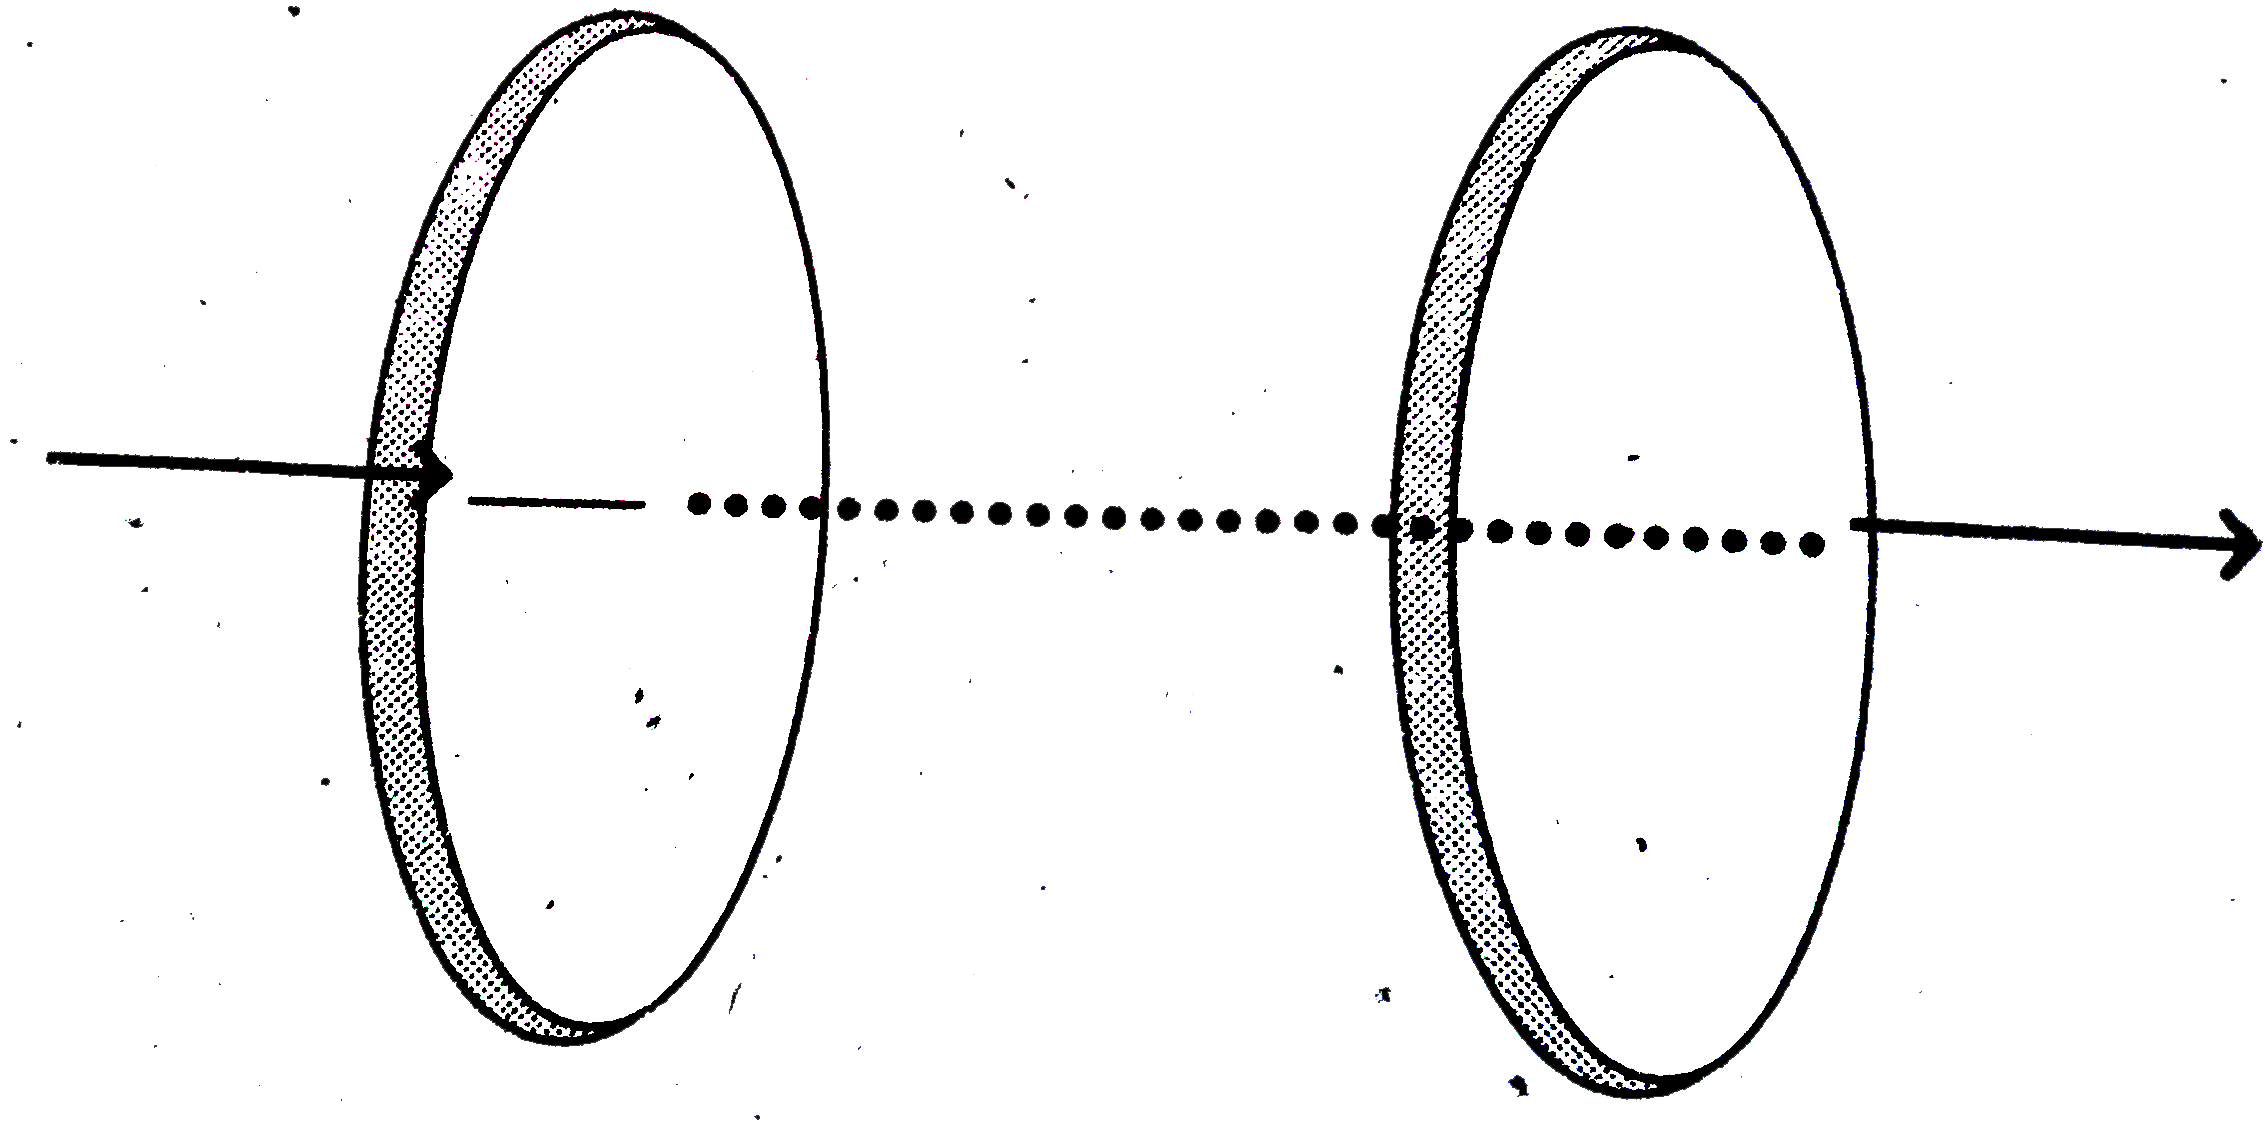 The figure shows a capacitor made of two circular plates each of radius 12 cm, and separated by 5.0 cm . The capacitor is beging charged by an external source (not shown in the figure. ) The charing is constant and equal to 0.15 A        Calculate the capacitance and the rate of charge of potential difference between the plates.